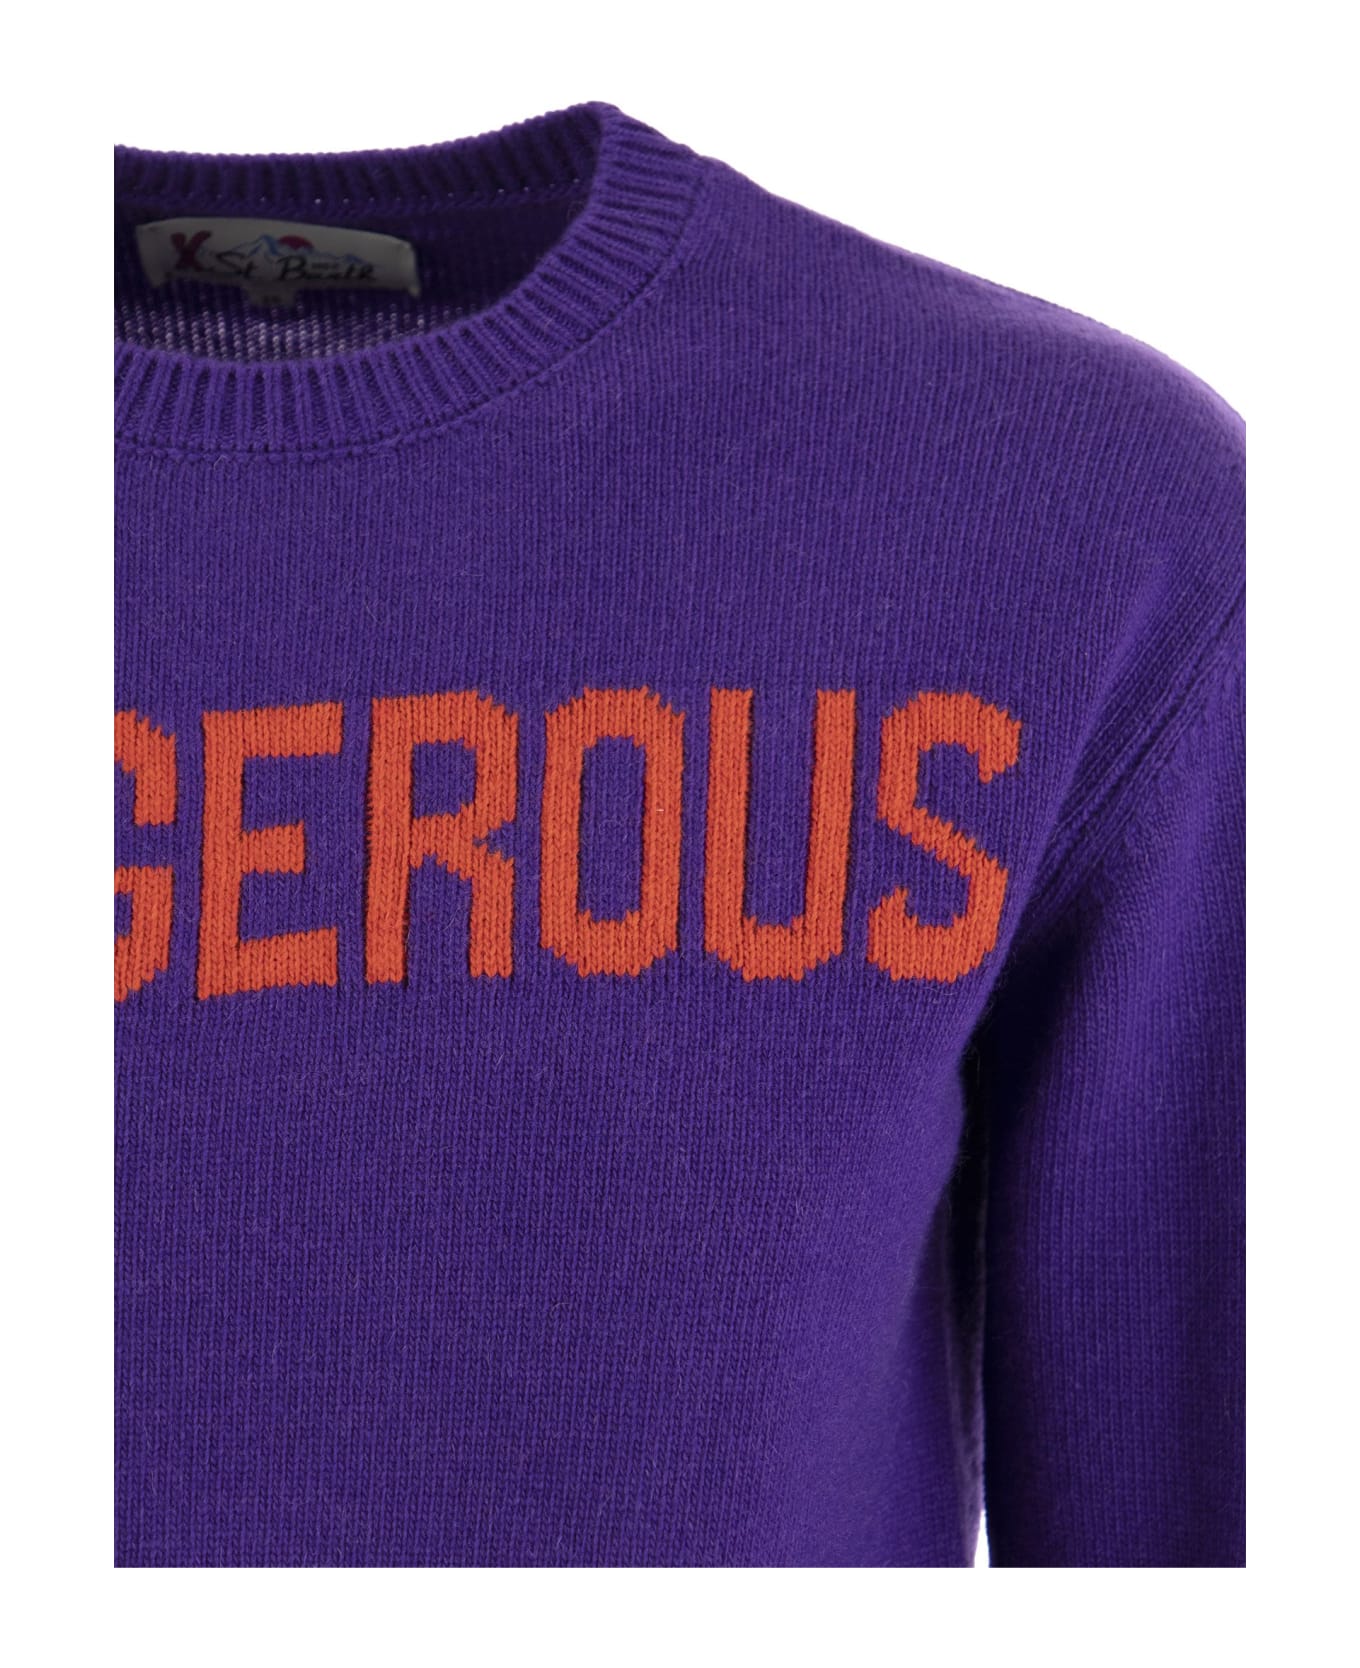 MC2 Saint Barth Wool And Cashmere Blend Jumper With Dangerous Embroidery - Purple ニットウェア